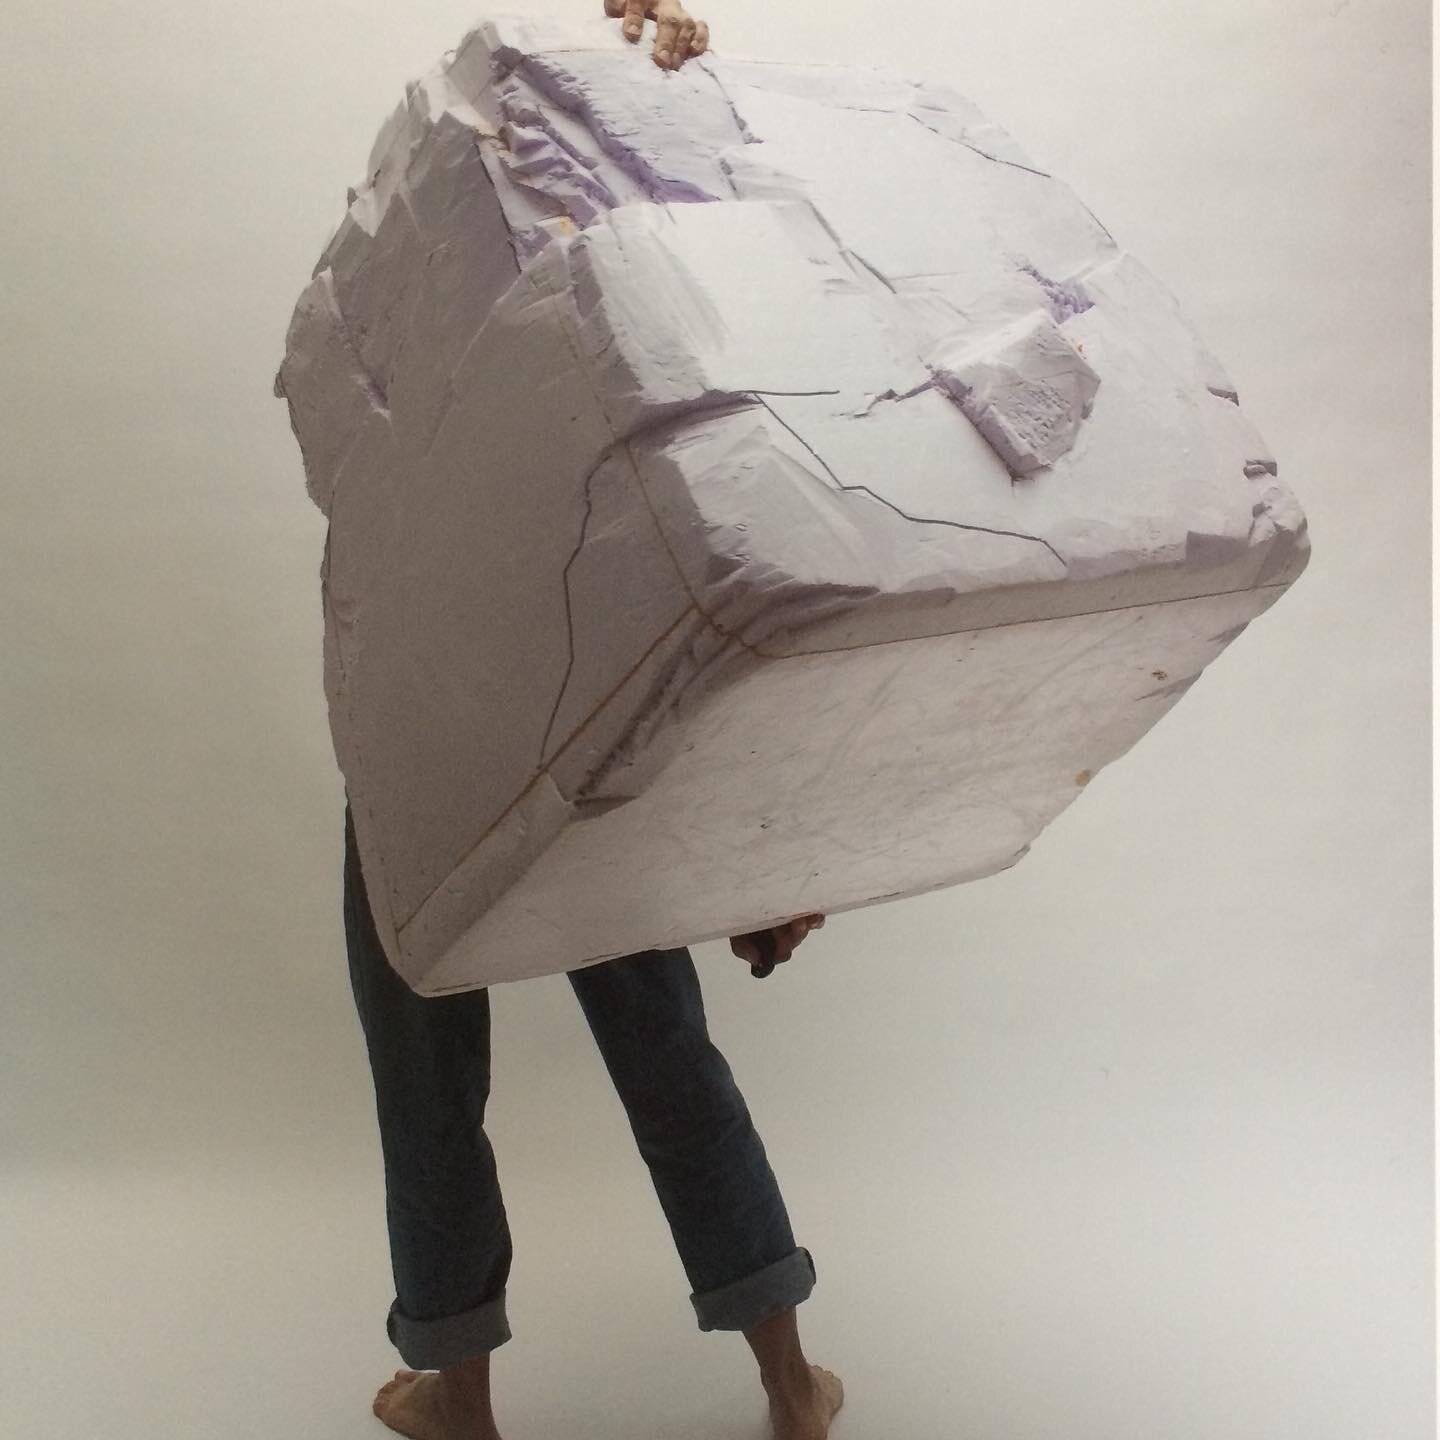 (The genesis of )Void, or a #study on #materiality, #reproduction and #perception. A small #stone that appeared in my book #quatremainszonderhanden became a huge #styrofoam #ubiquity and the starting point for new work. Groupshow from 05/06 till 13/0